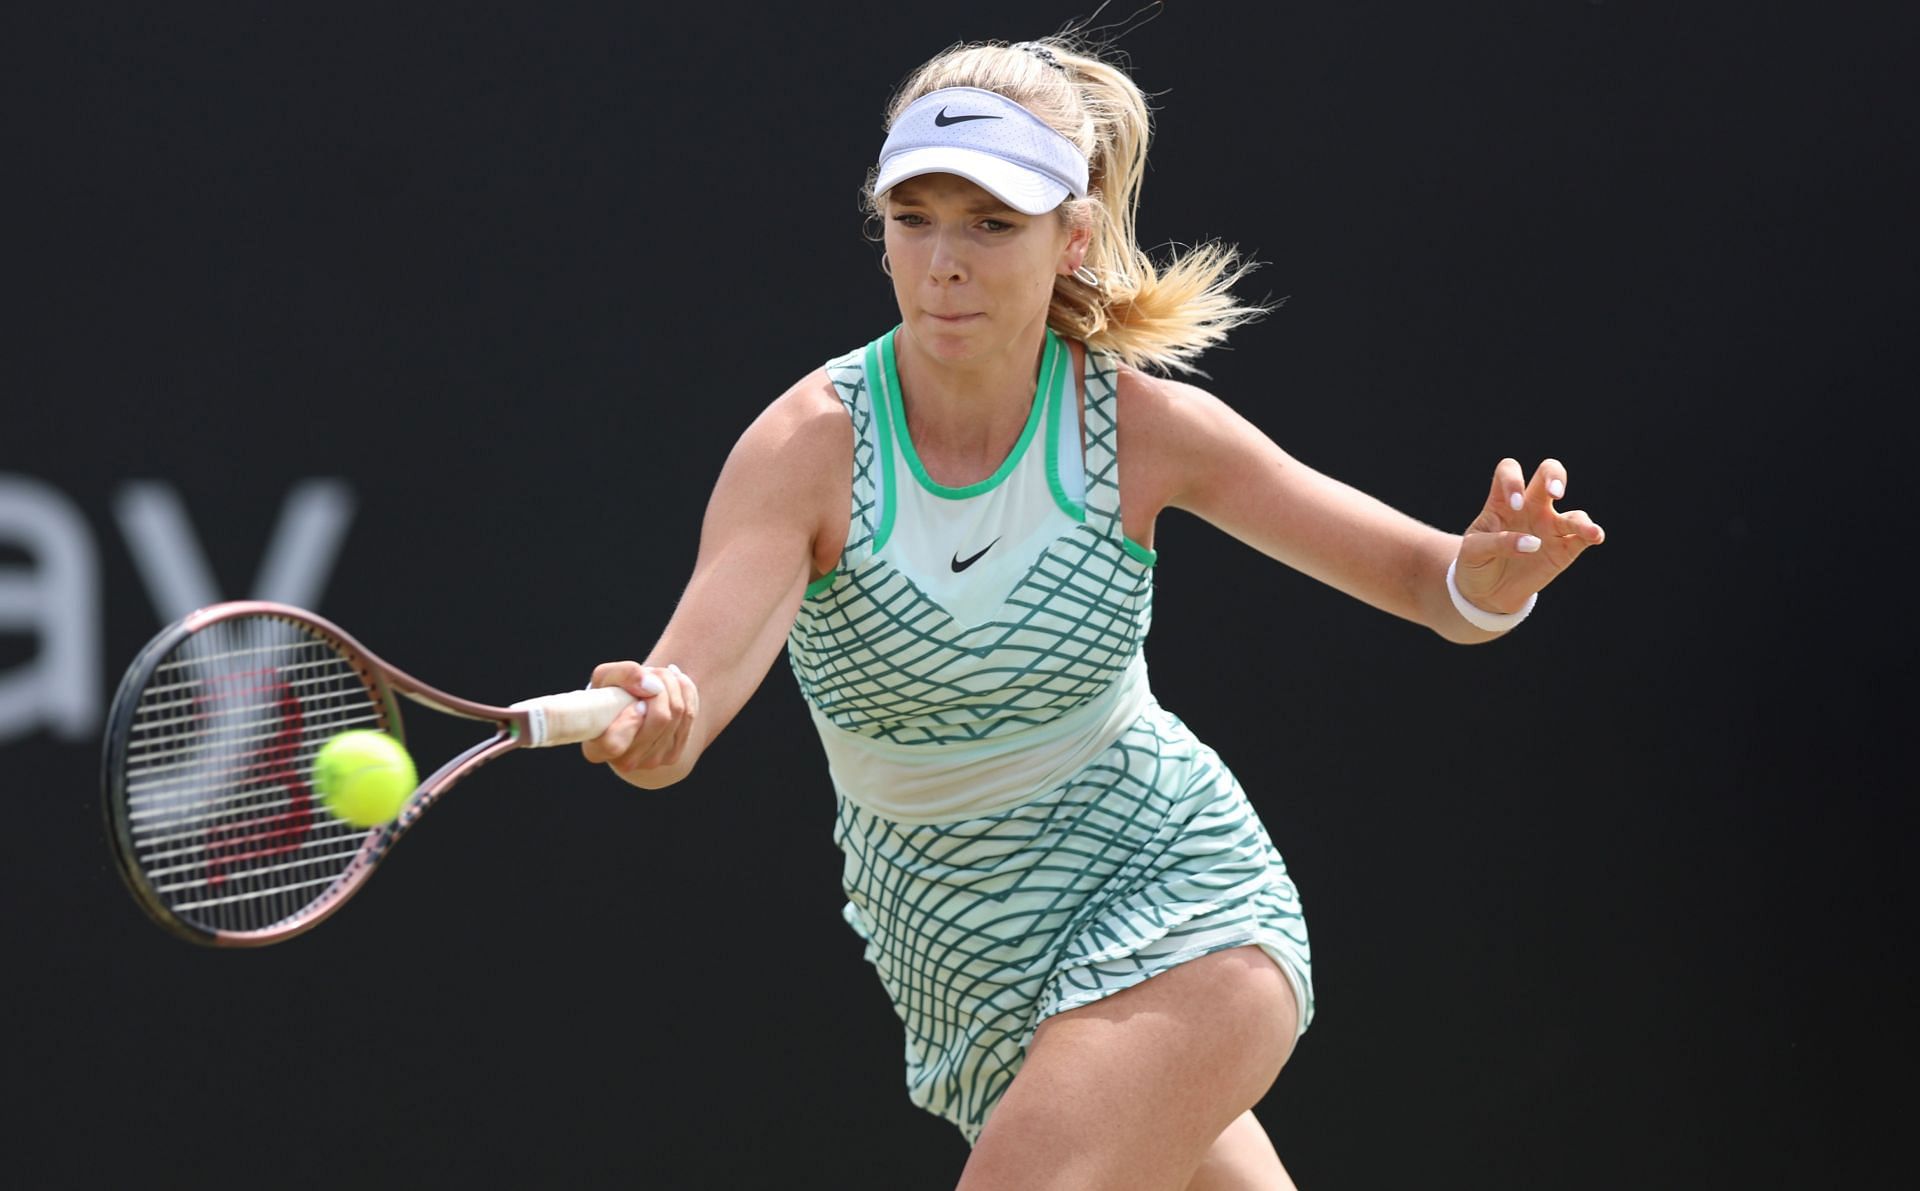 Katie Boulter in action at the Rothesay Open